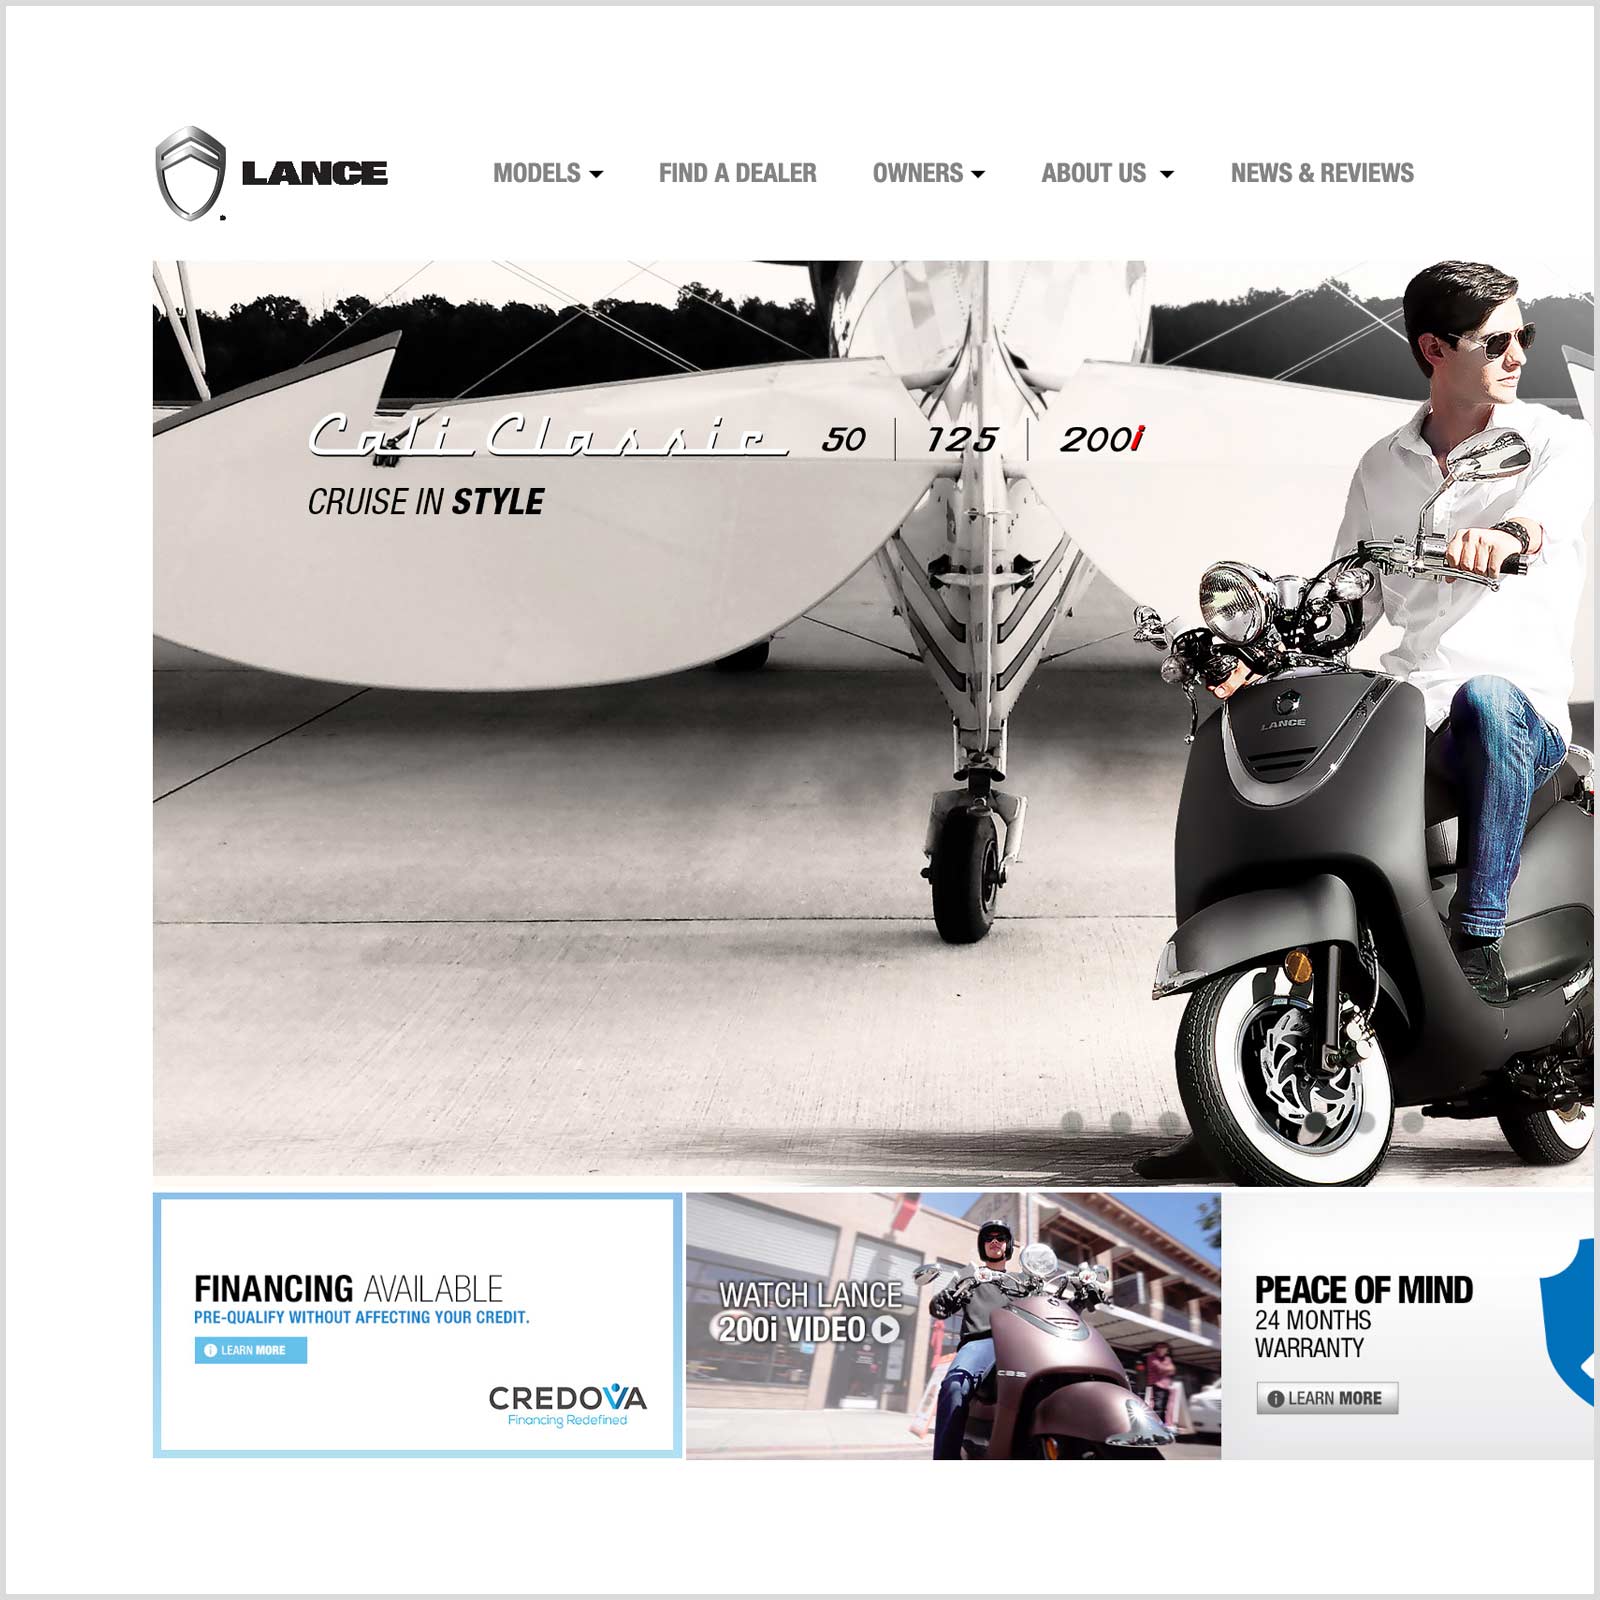 Lance Pleased to Announce the Launch of New Lance Website